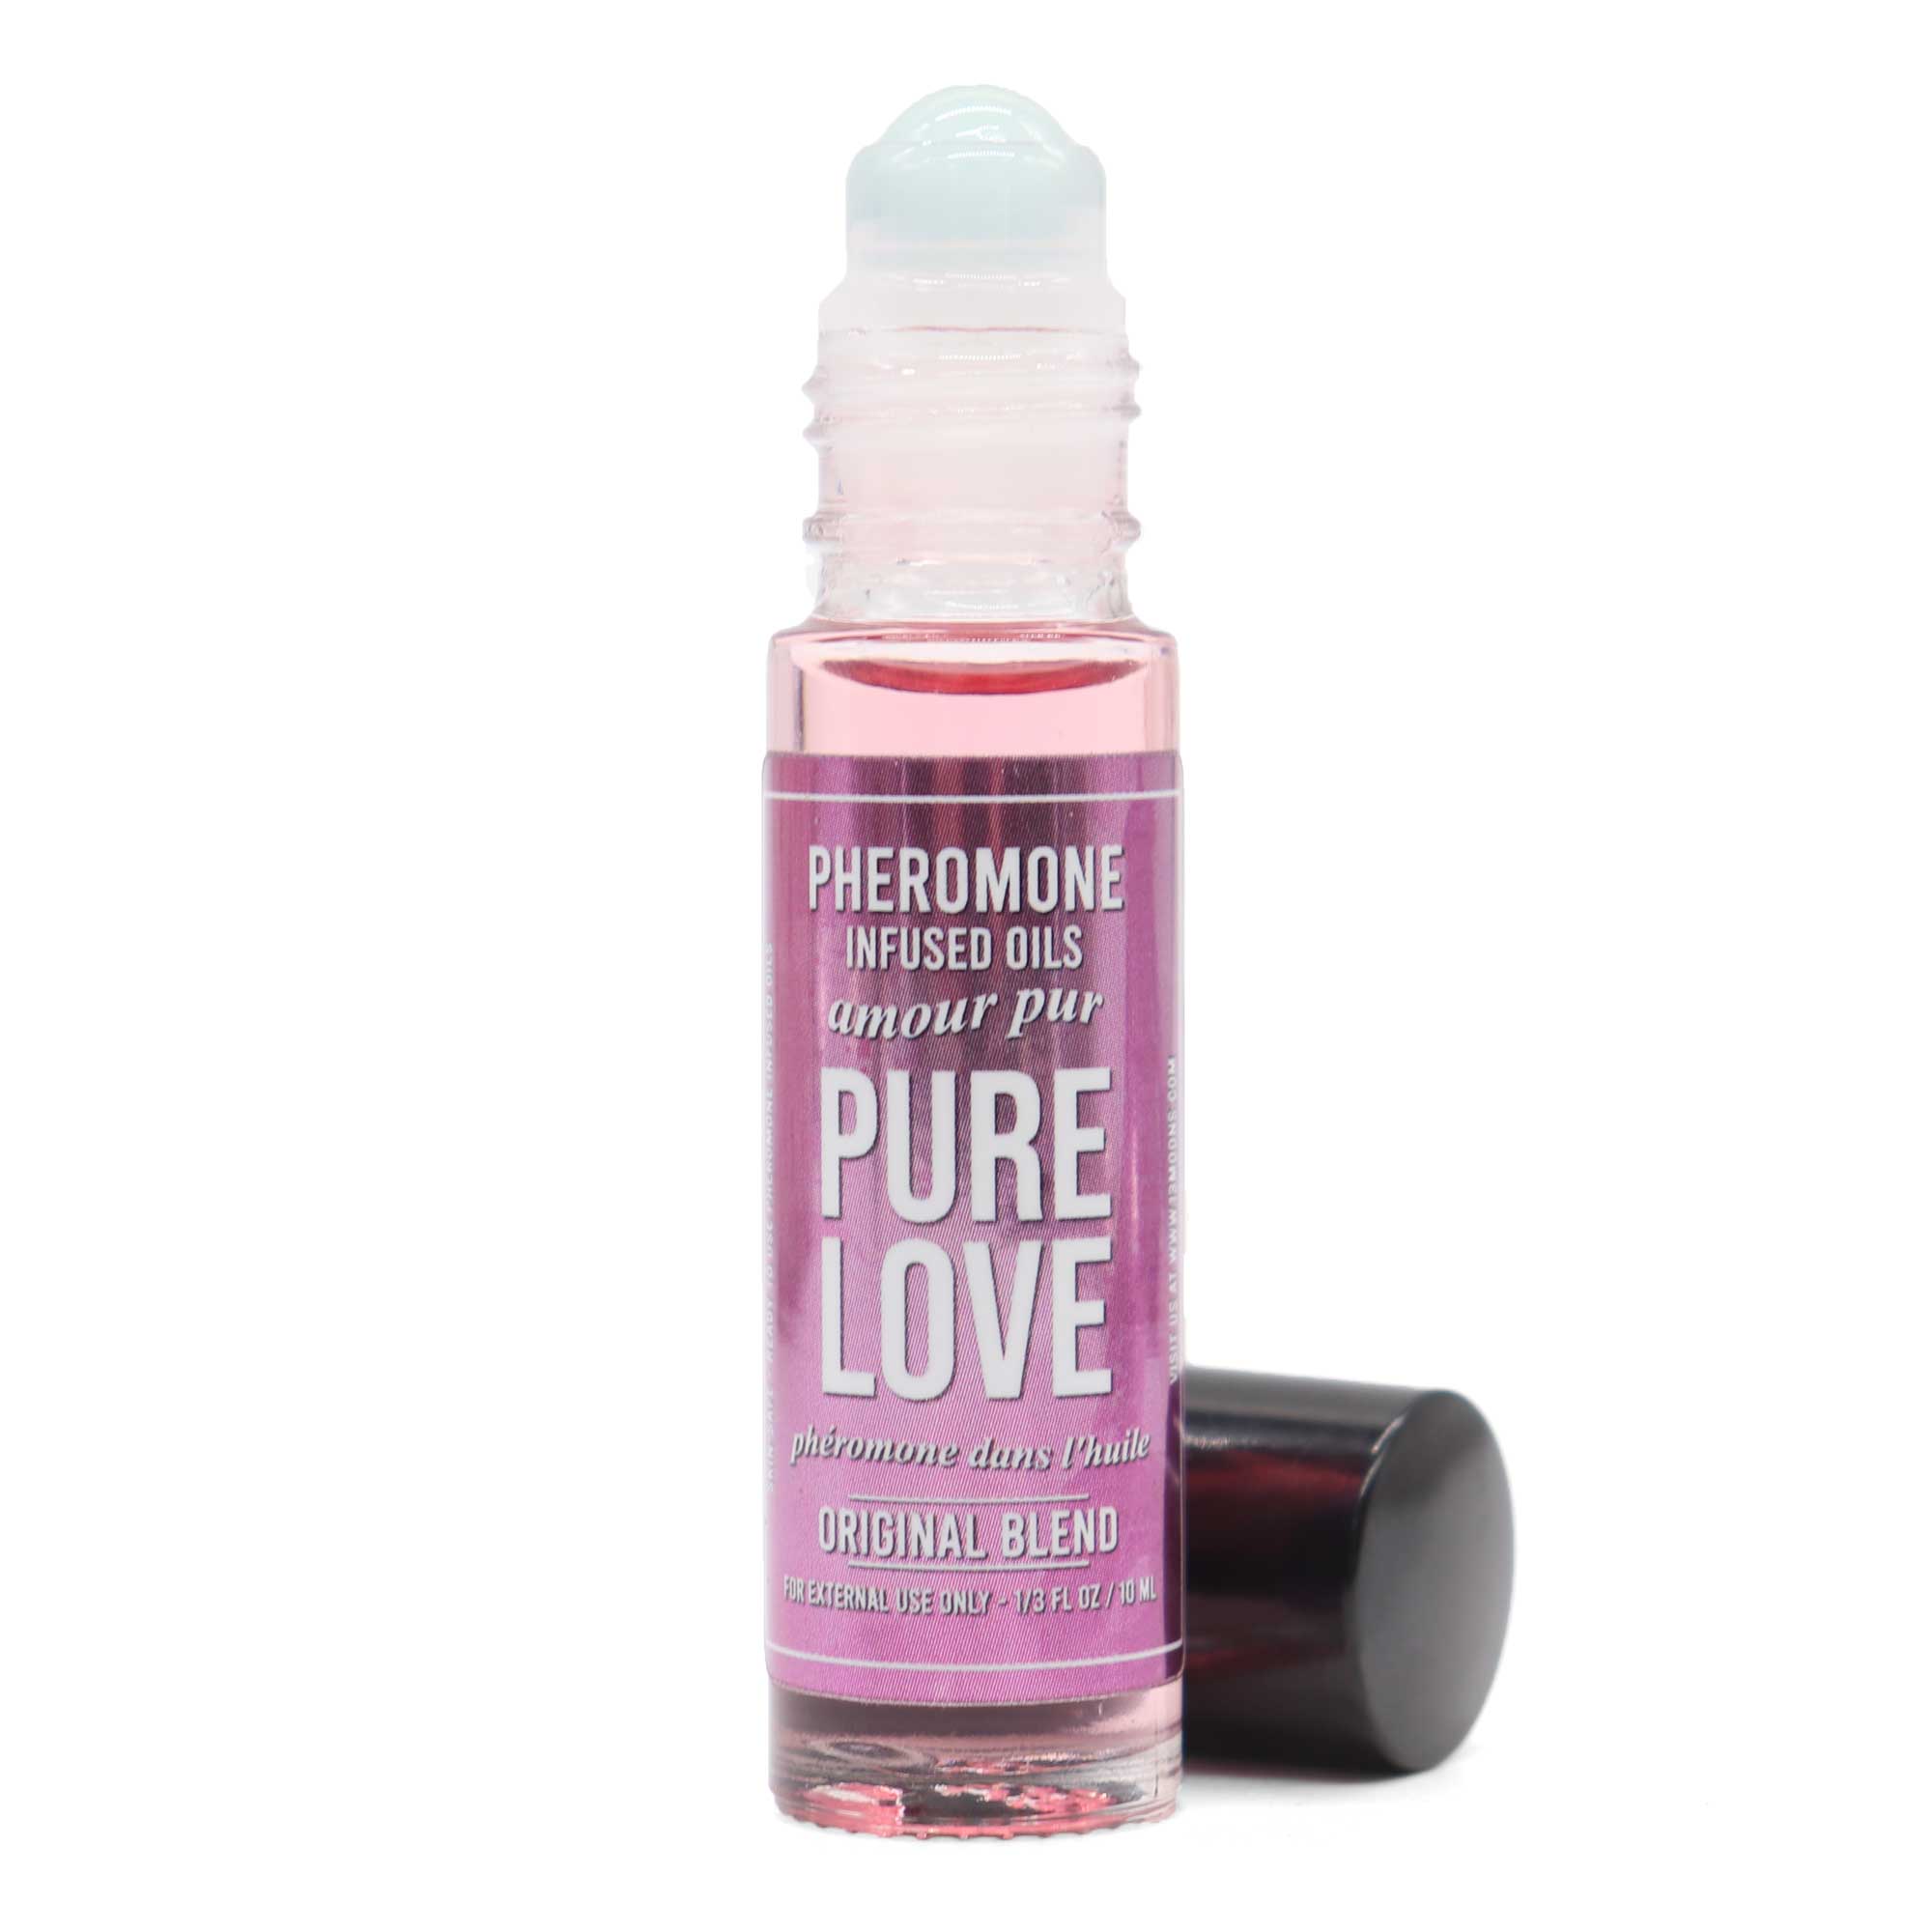 Pure Amore Hand Blended Oil with Real Pheromones